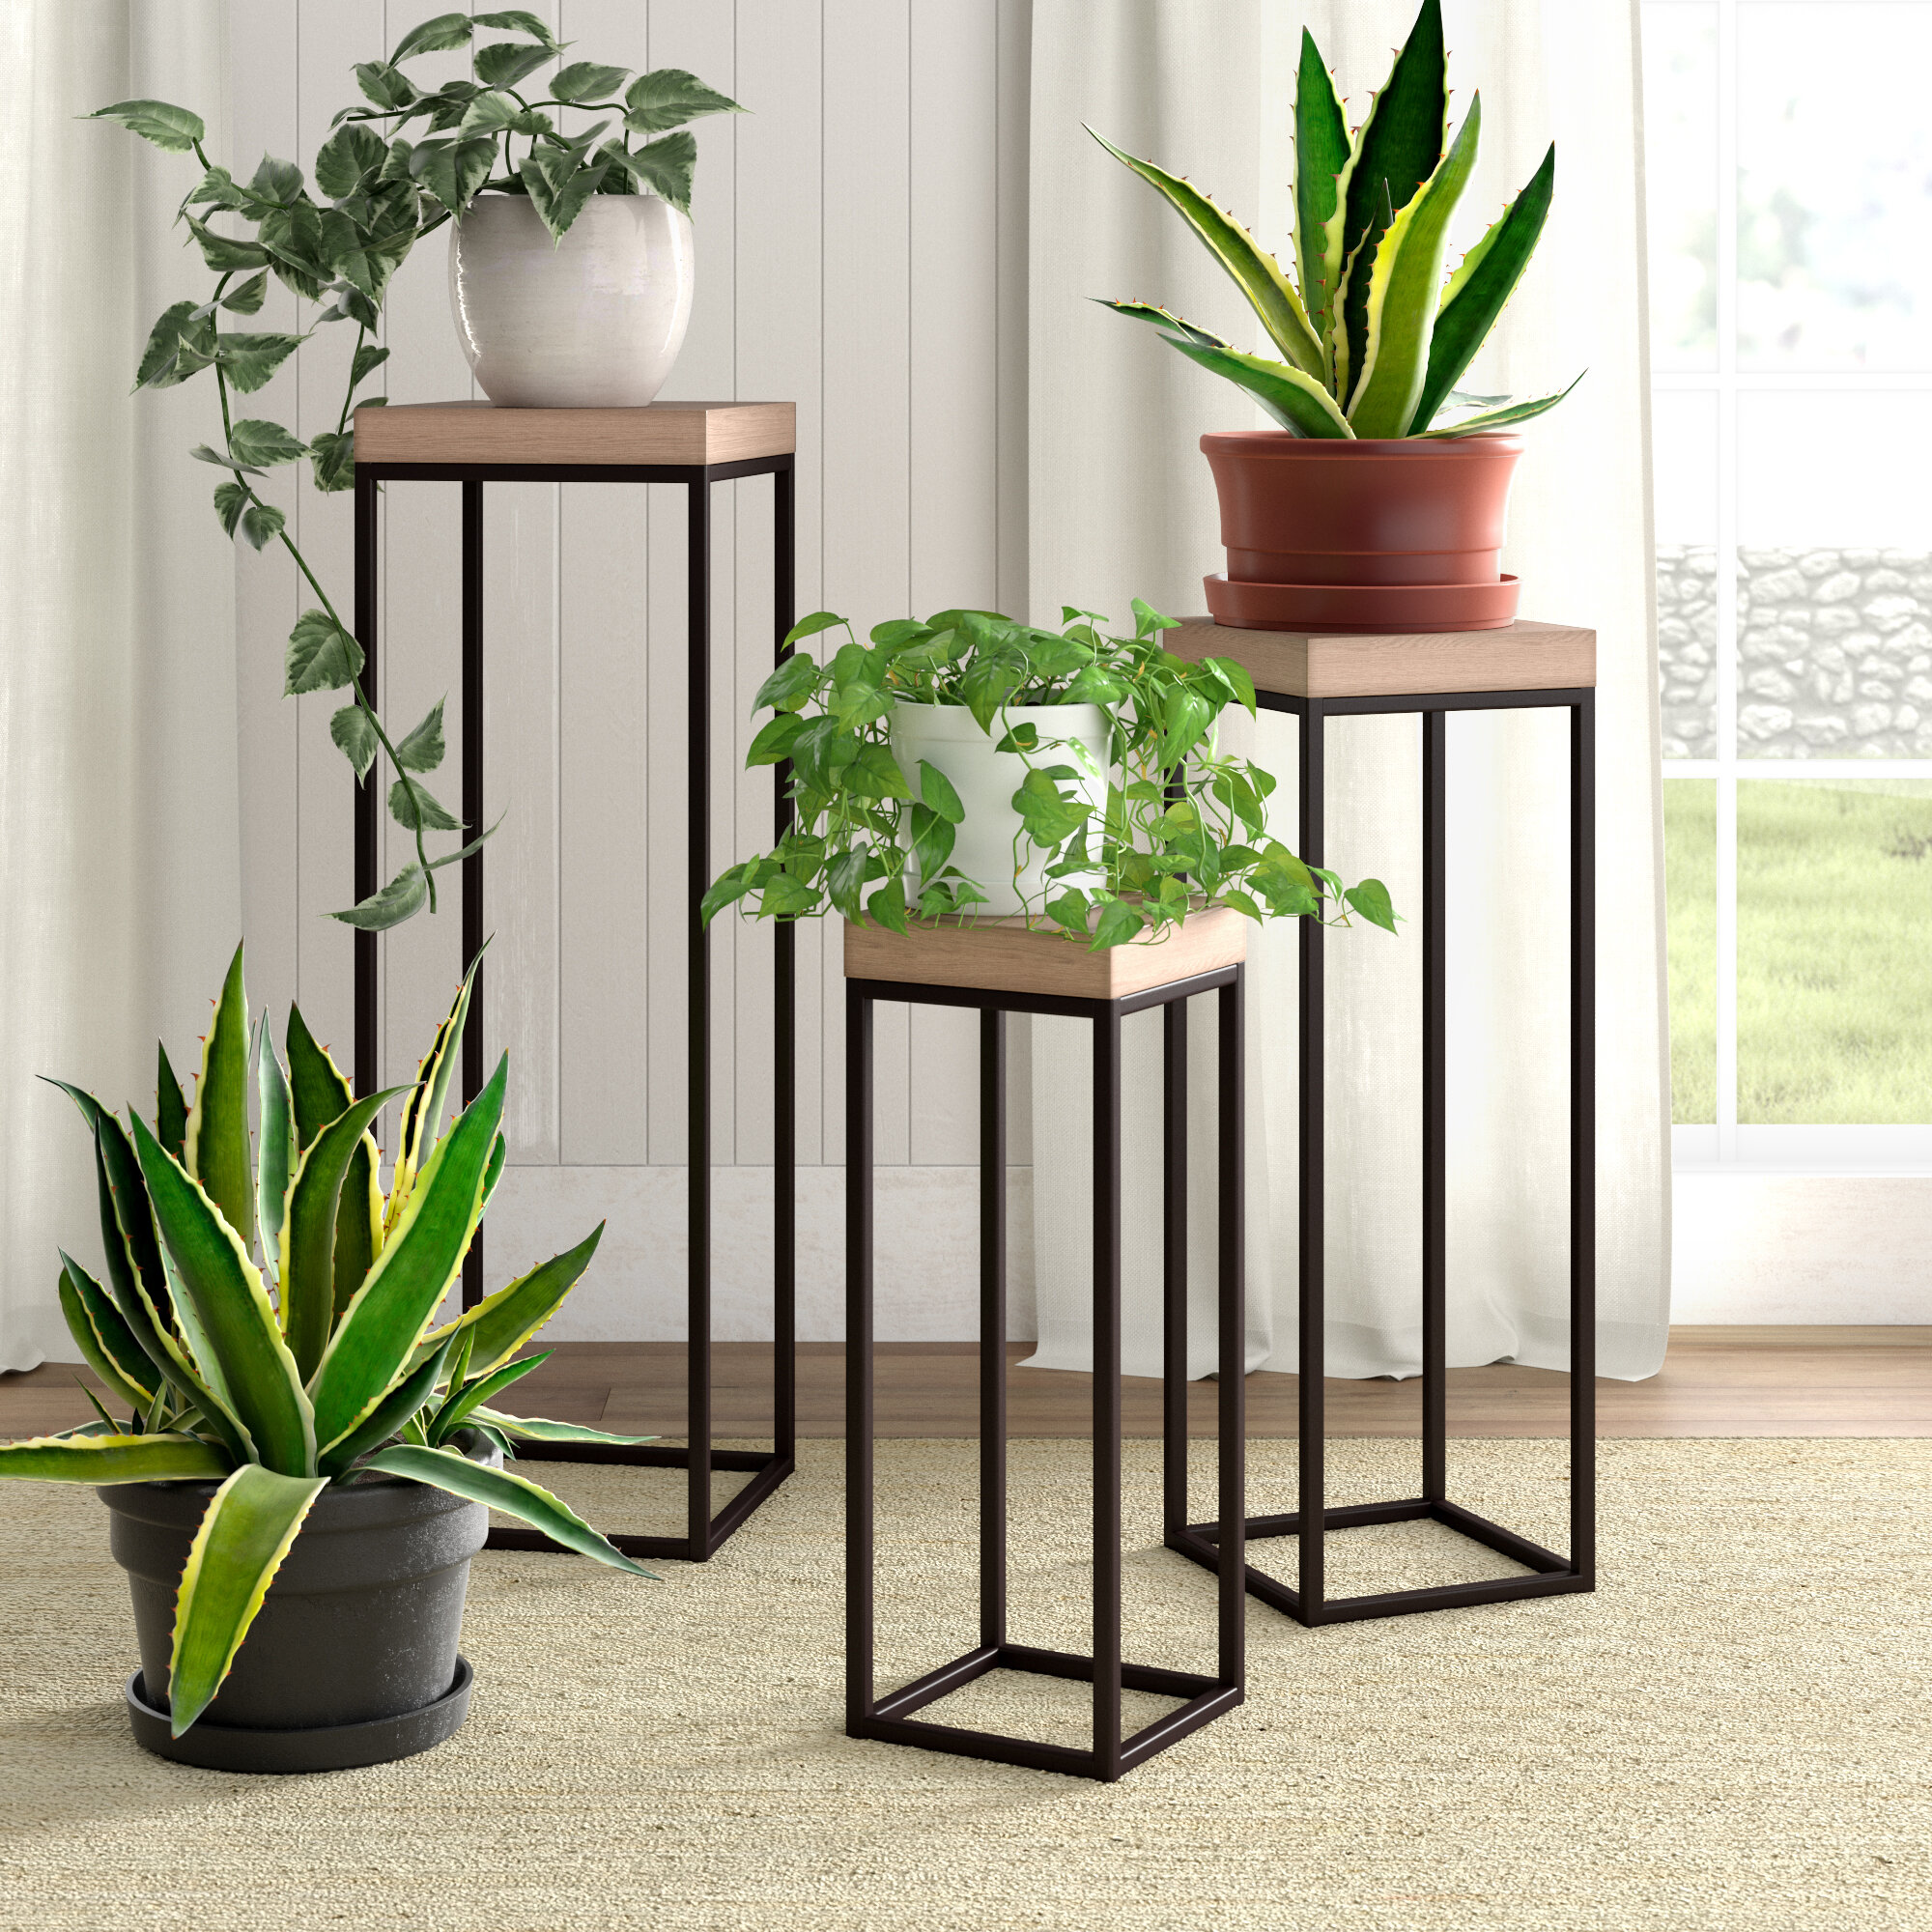 Nesting Plant Stands & Tables You'll Love | Wayfair